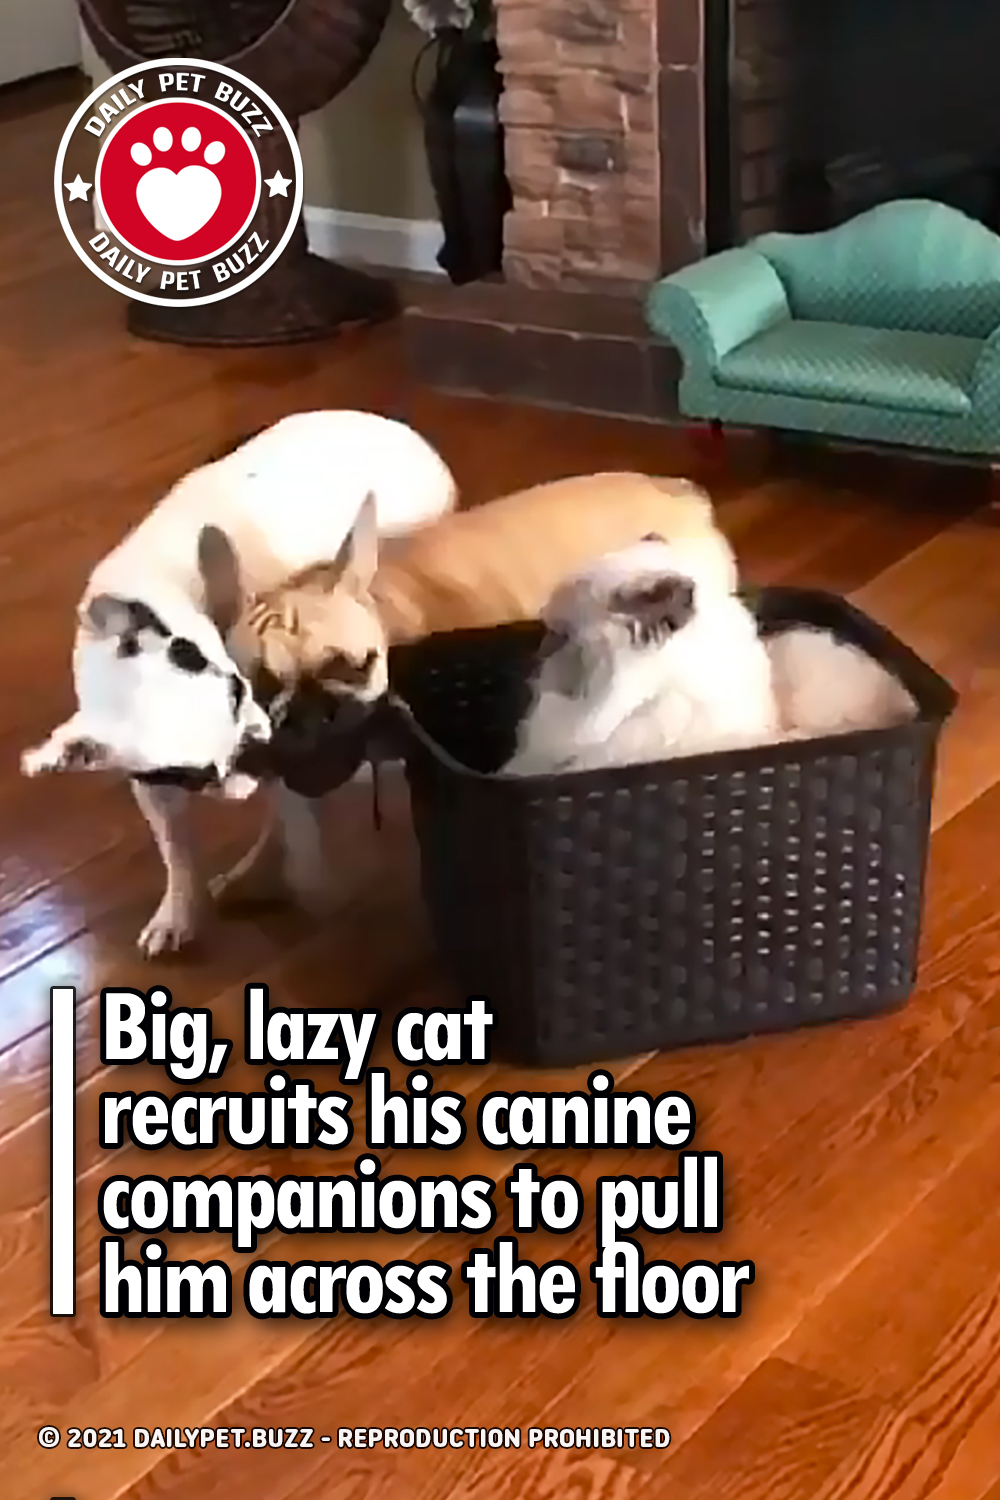 Big, lazy cat recruits his canine companions to pull him across the floor